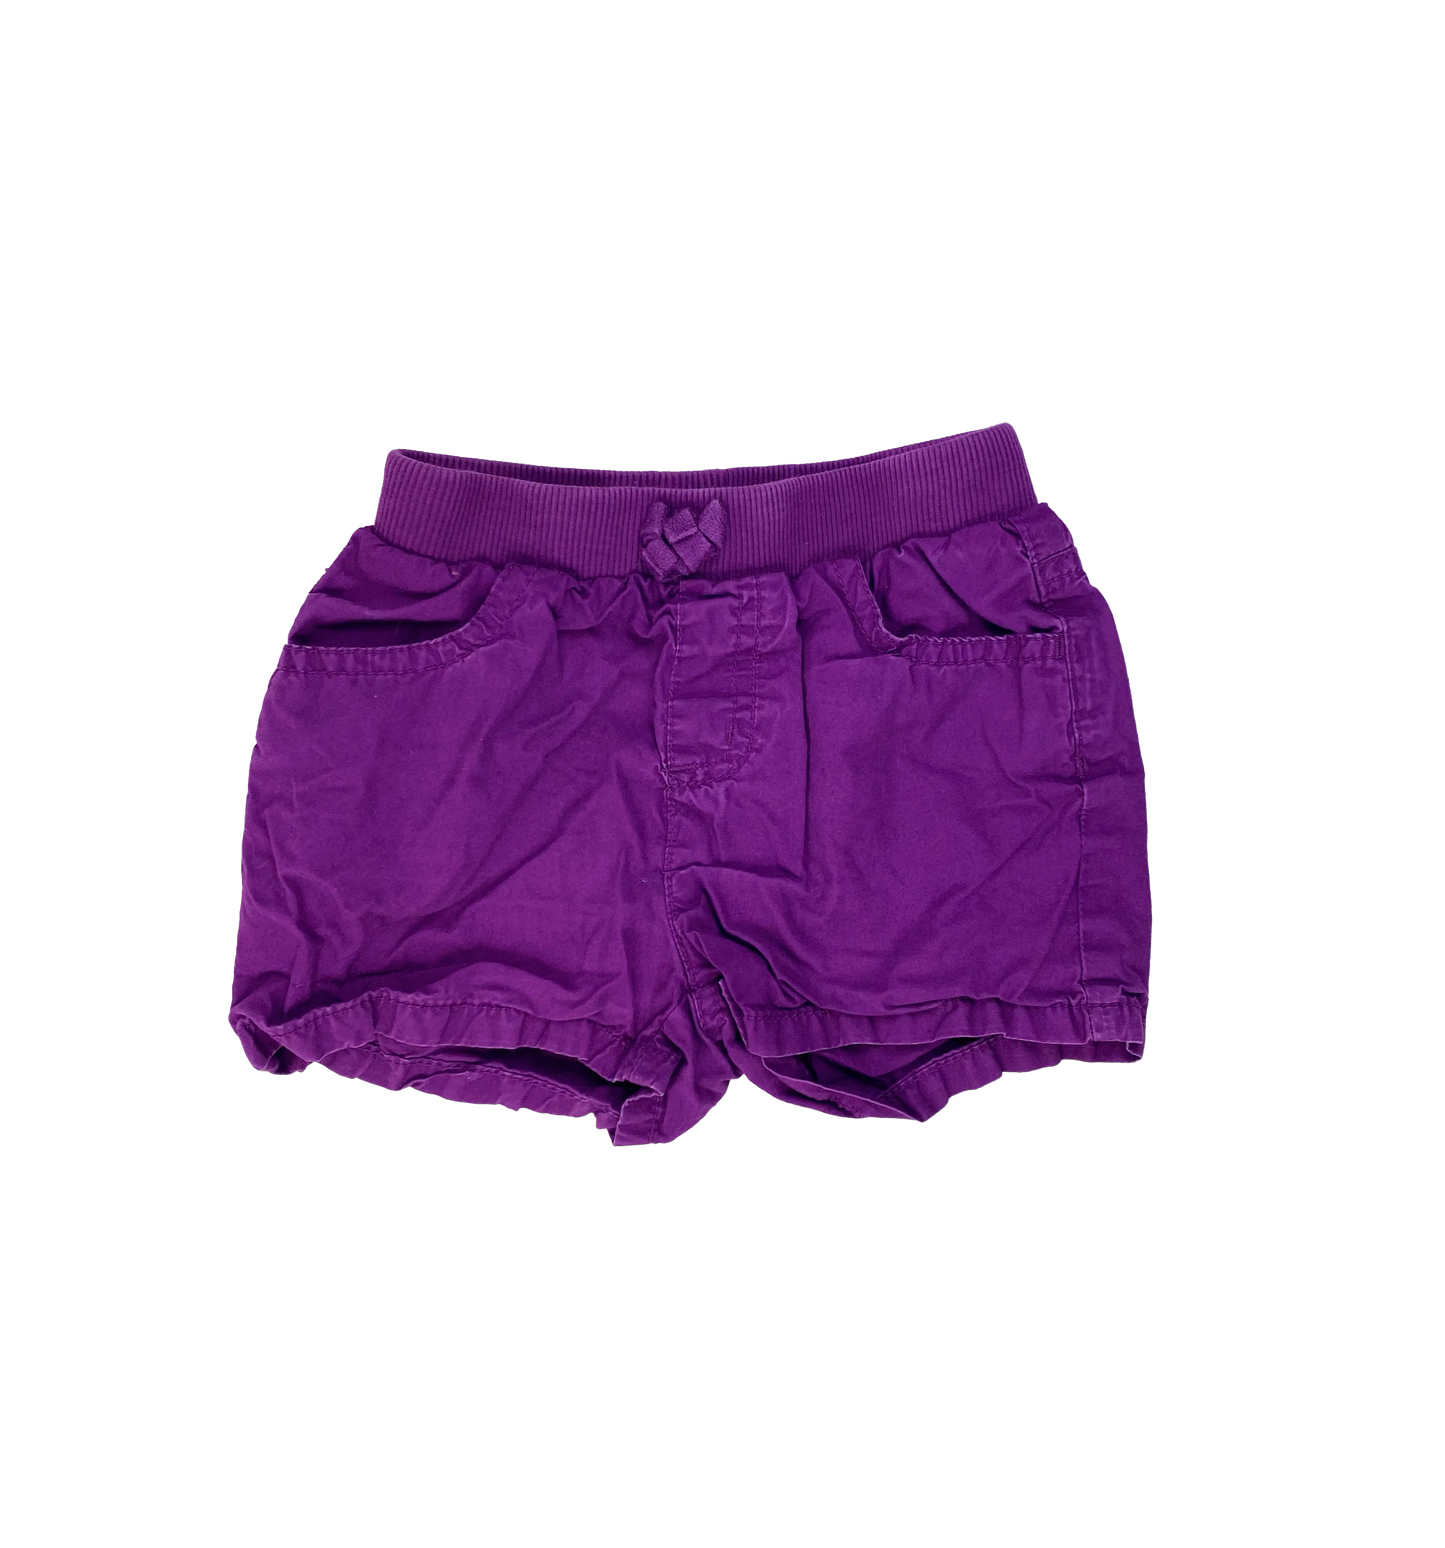 The Children's Place Purple Pull-On Shorts 4T